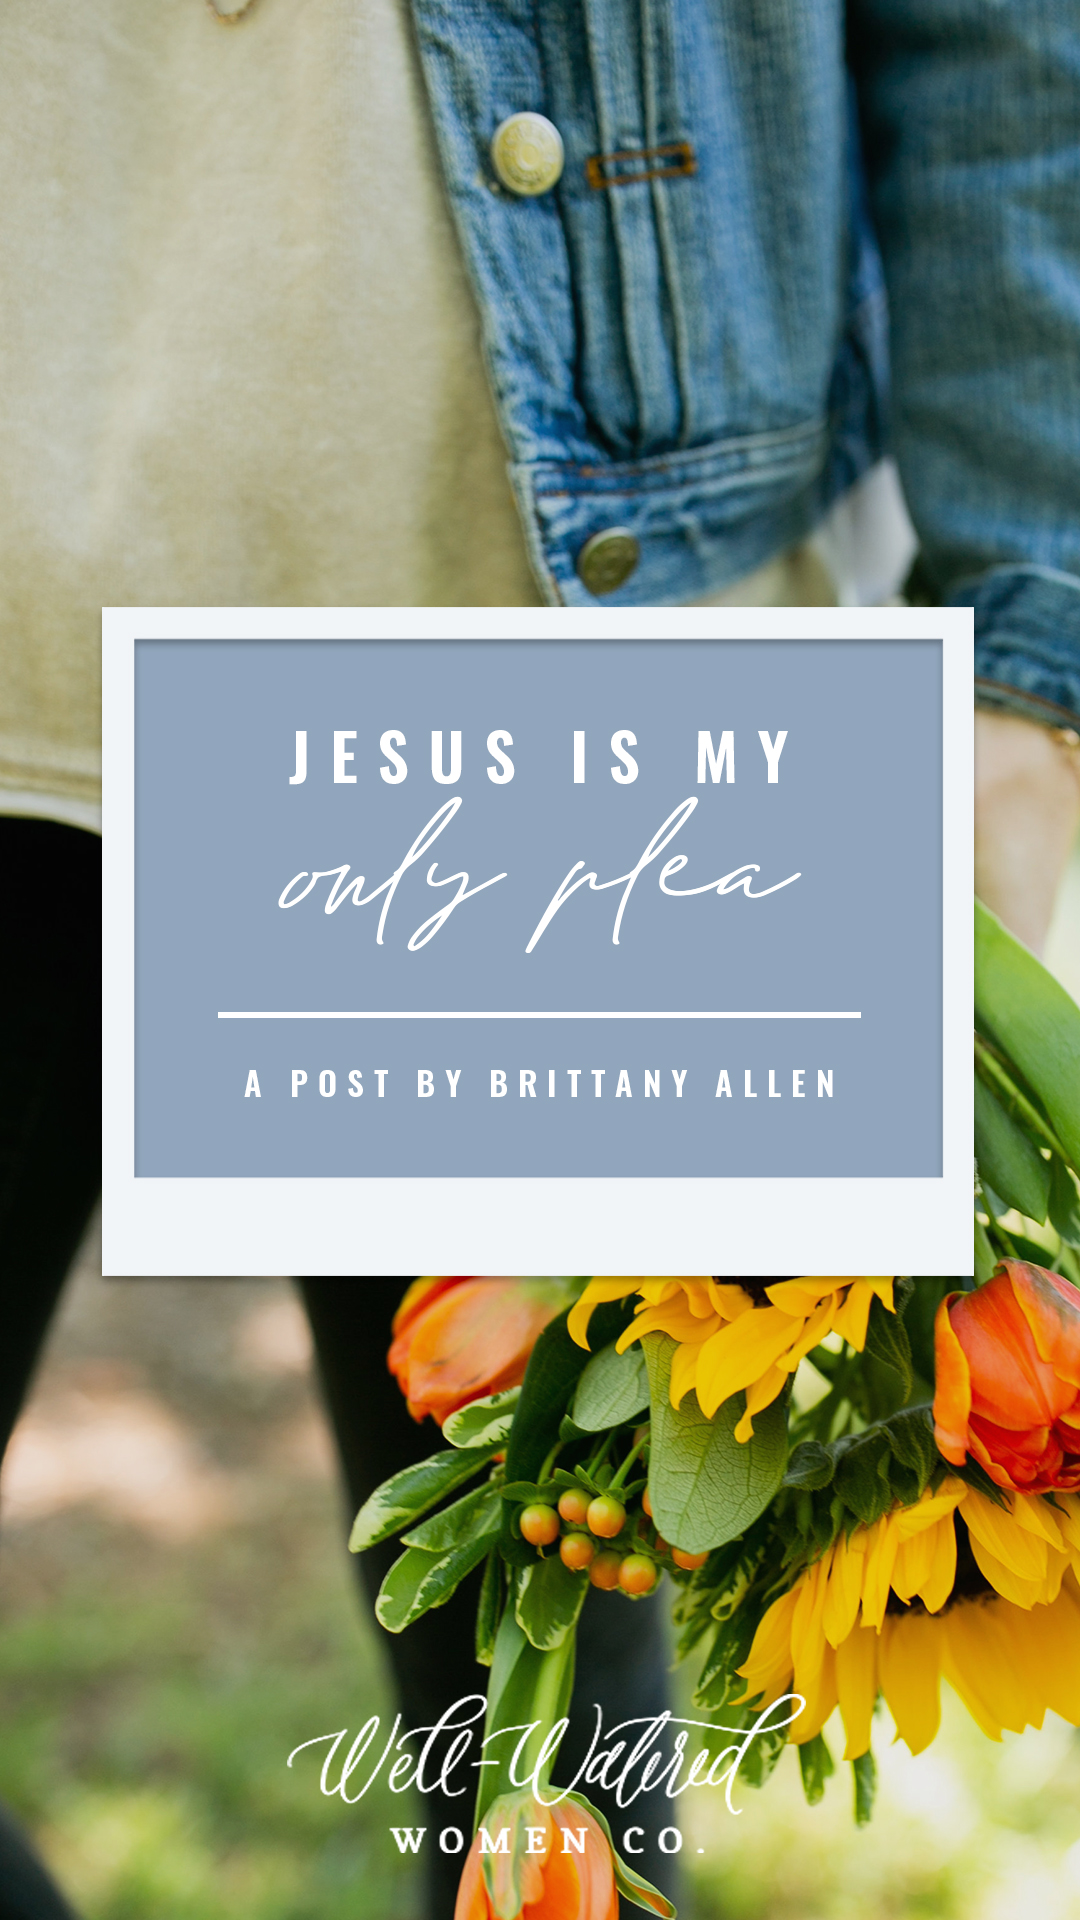 Well-Watered Women Blog - Jesus Is My Only Plea - a post by Brittany Allen